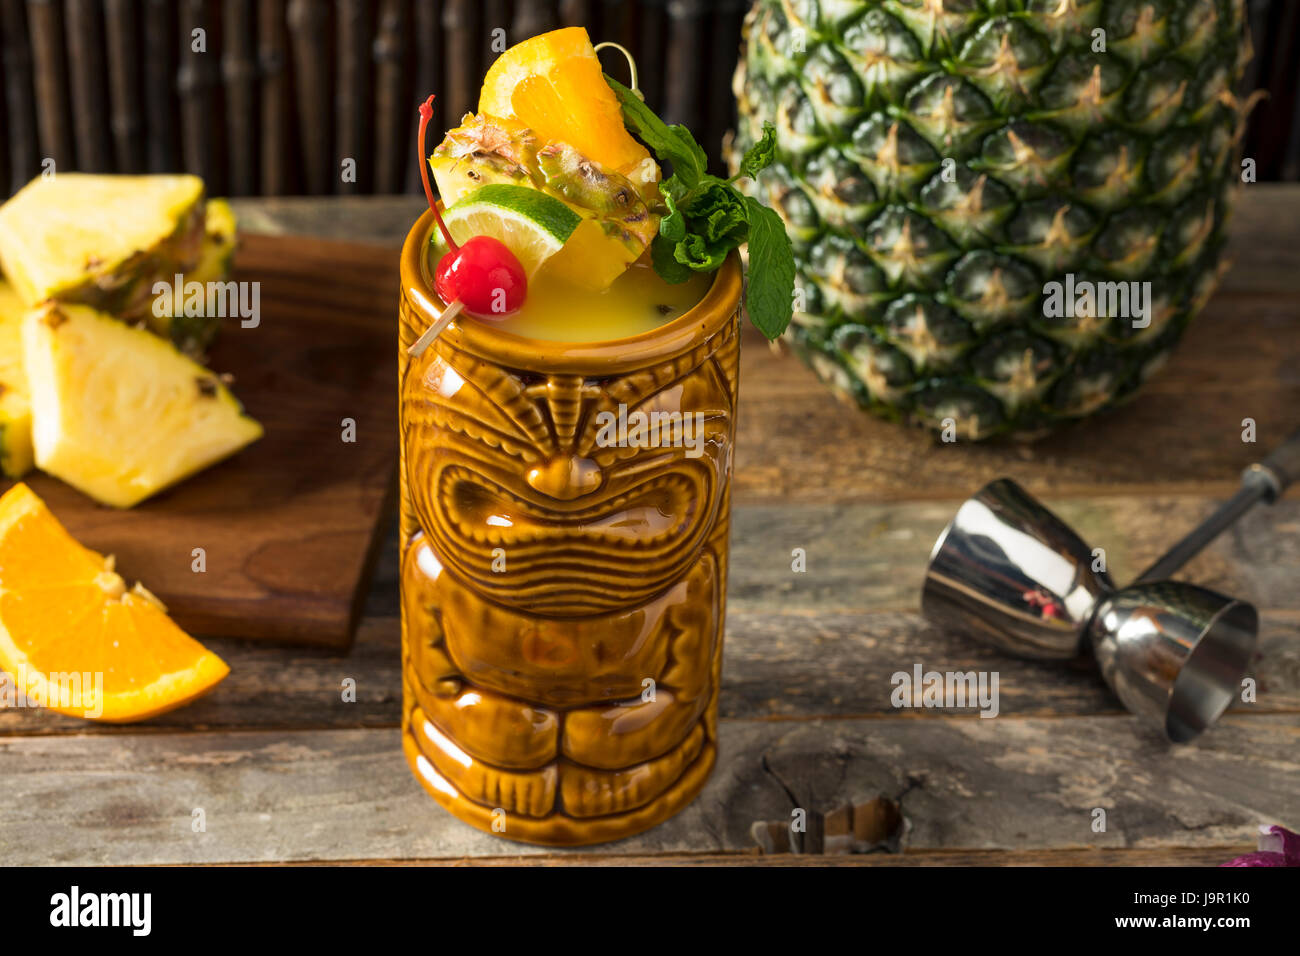 Refreshing Cold Tiki Drink Cocktails with Pineapple Cherry Orange Garnishes Stock Photo